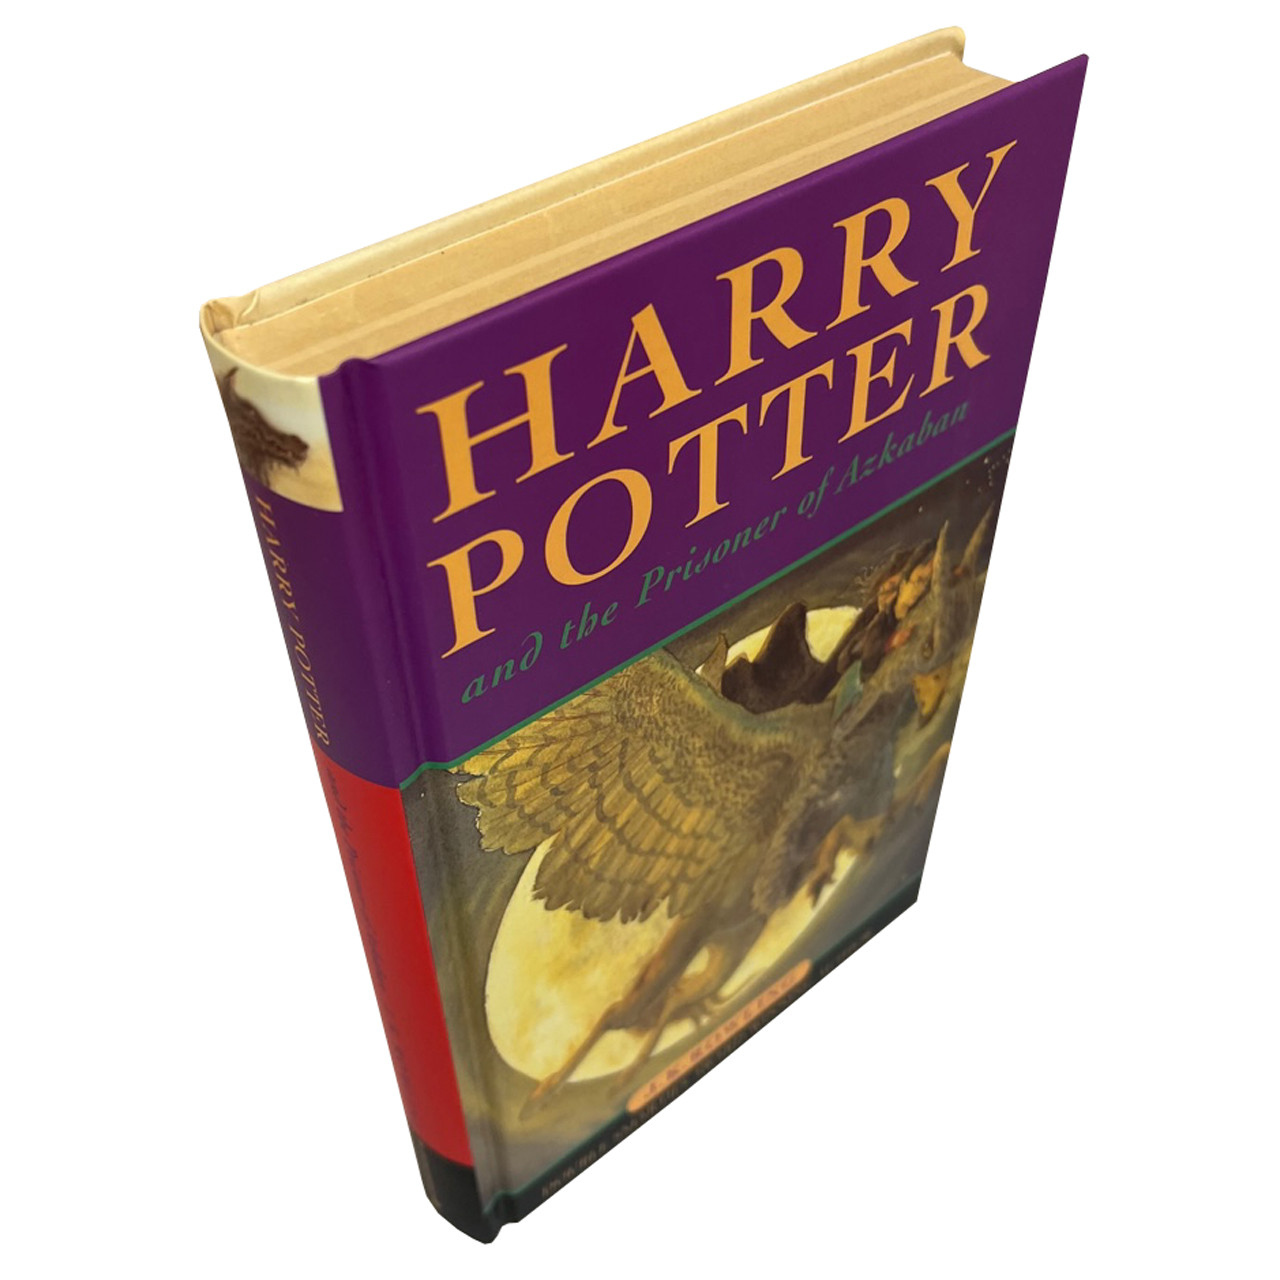 J.K. Rowling "Harry Potter And The Prisoner of Azkaban" Traycased First Edition, First State "Joanne Rowling 1999"